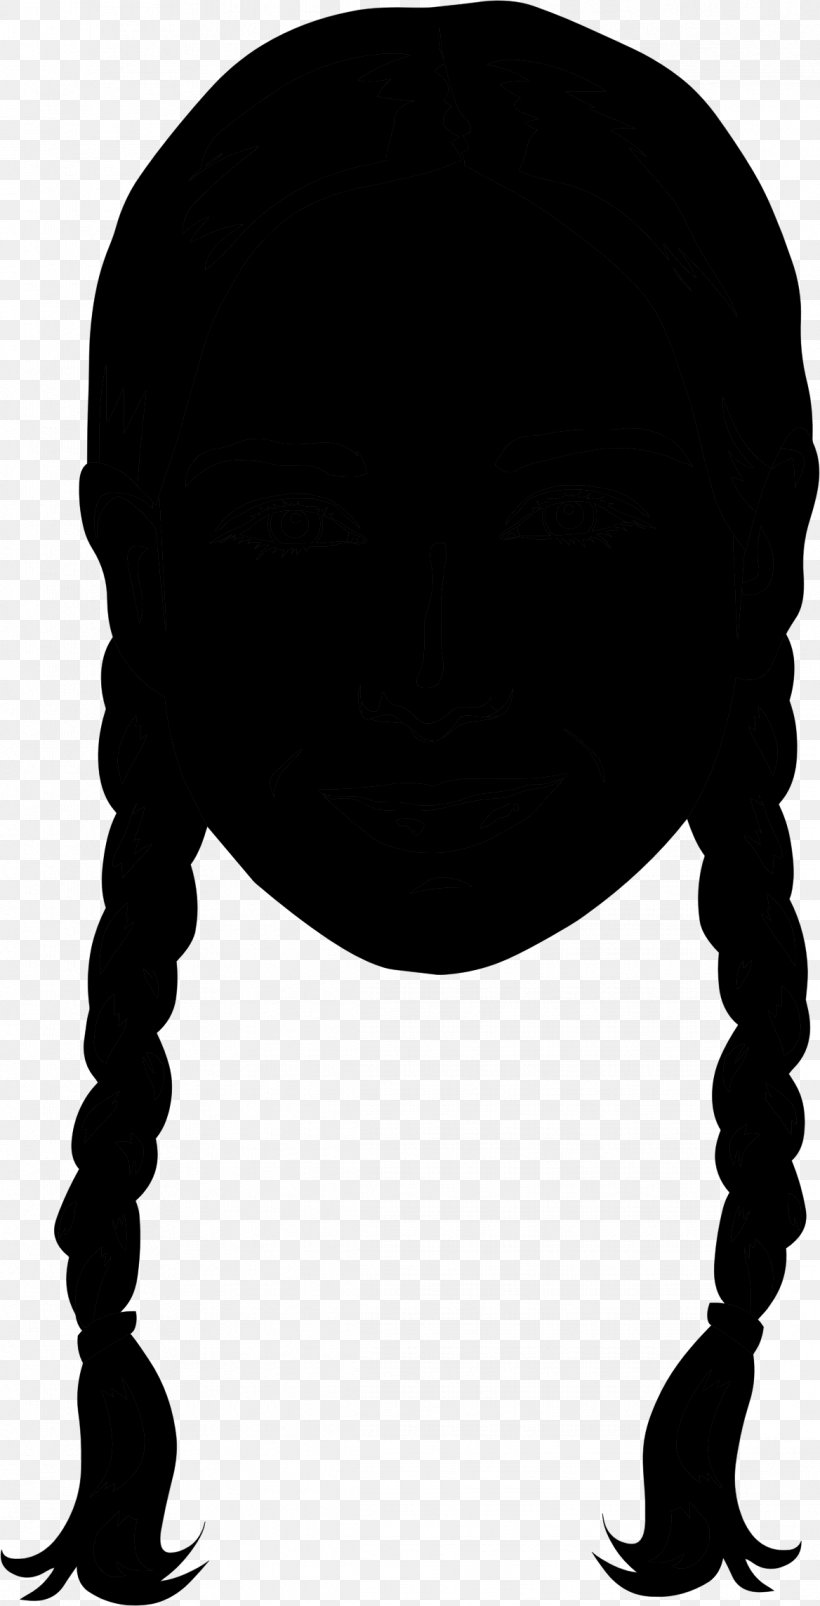 Neck Silhouette Capital Asset Pricing Model, PNG, 1168x2288px, Neck, Black, Black Hair, Cap, Capital Asset Pricing Model Download Free